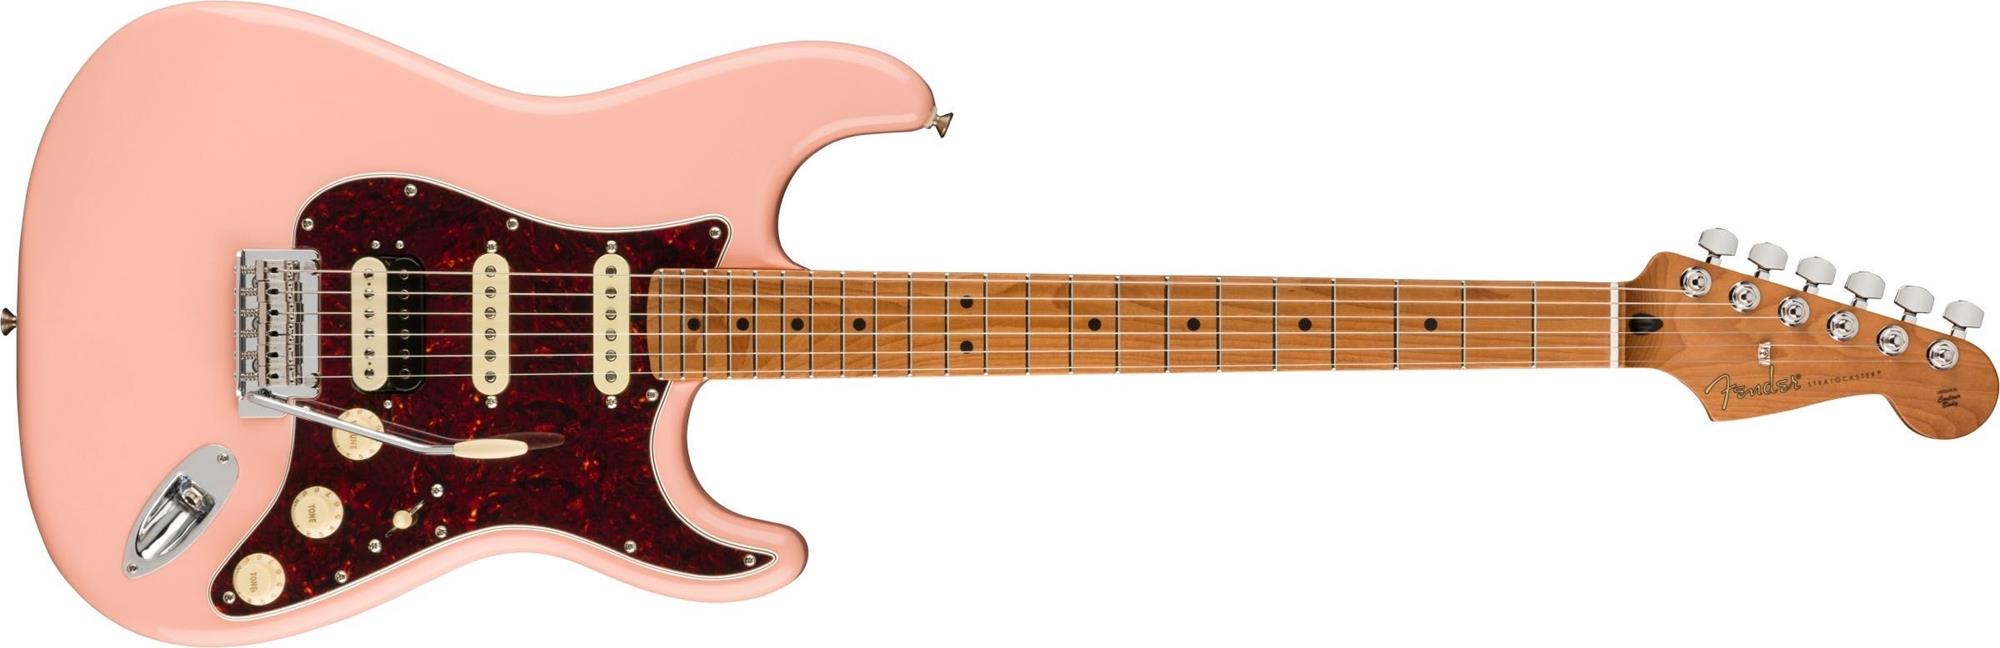 FENDER-DELUXE-PLAYER-STRATOCASTER-HSS-ROASTED-MN-SHELL-PINK-0144522556-sku-25215